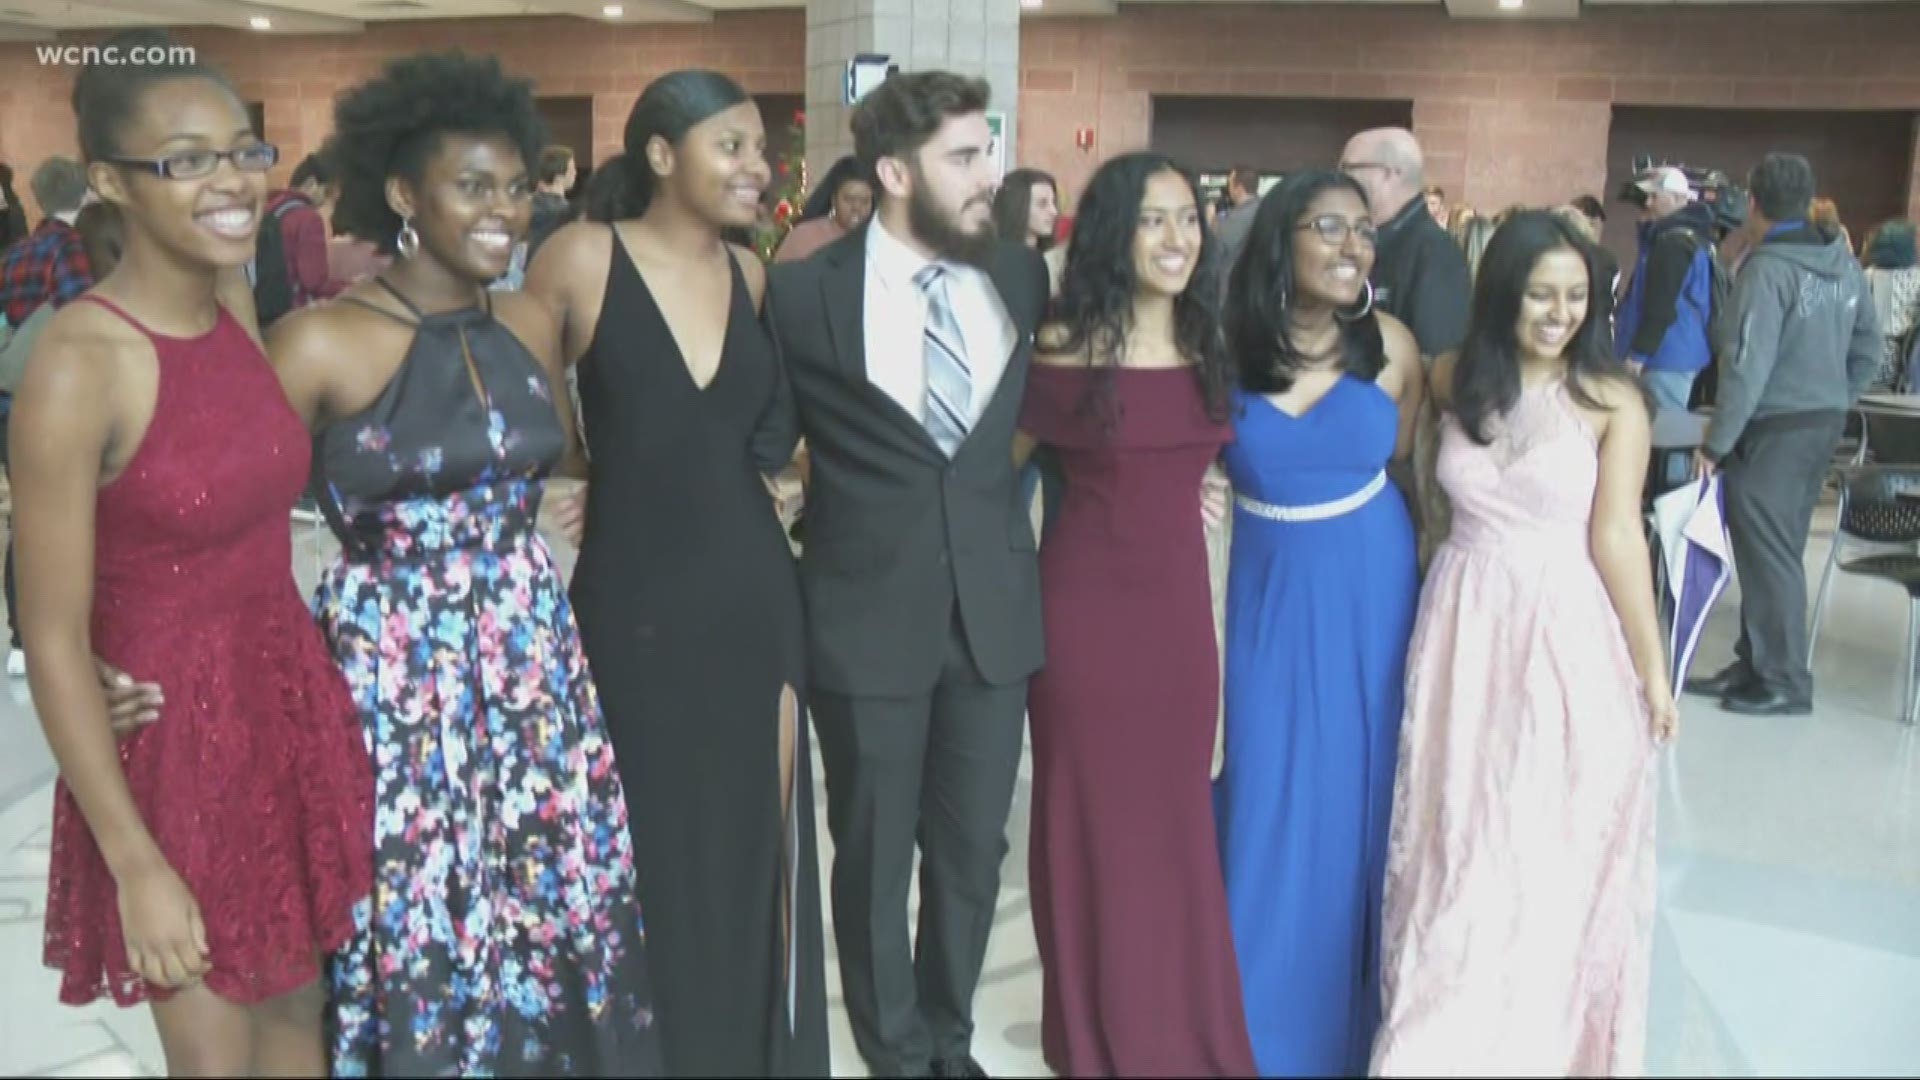 Students at Levine Middle College High School are getting dresses, suits, shoes, make-up and all paid for thanks to Belk's Project Hometown program.